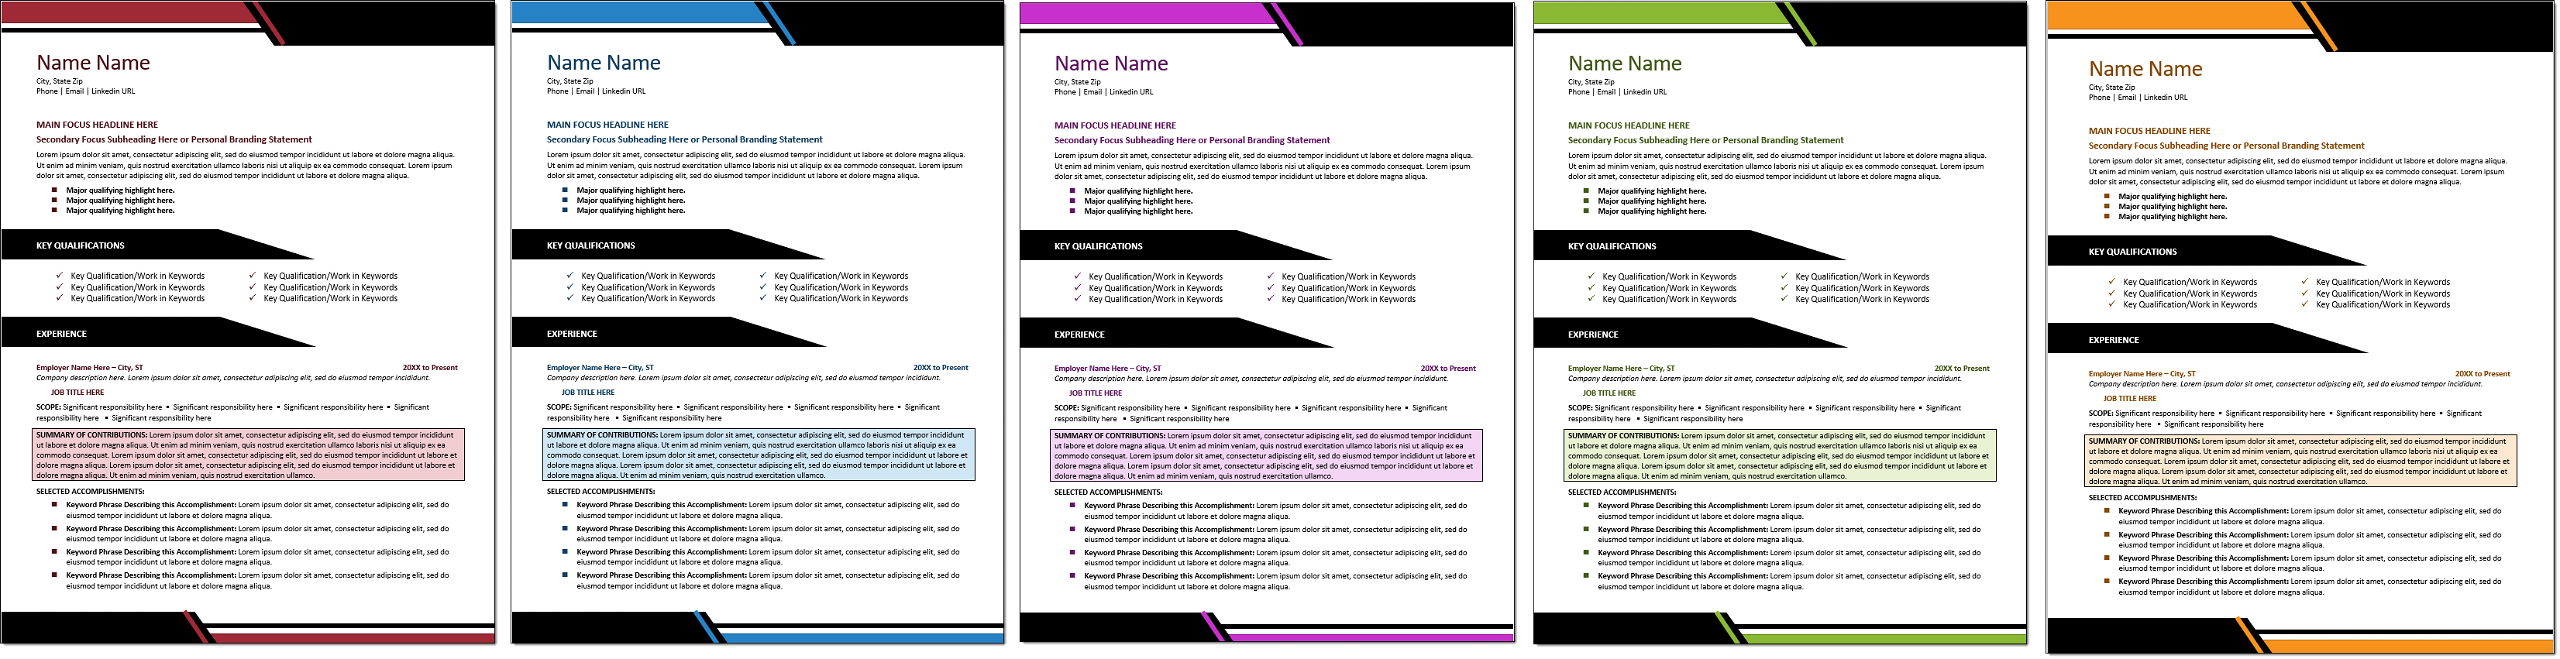 Power Play Resume Template Color Choices